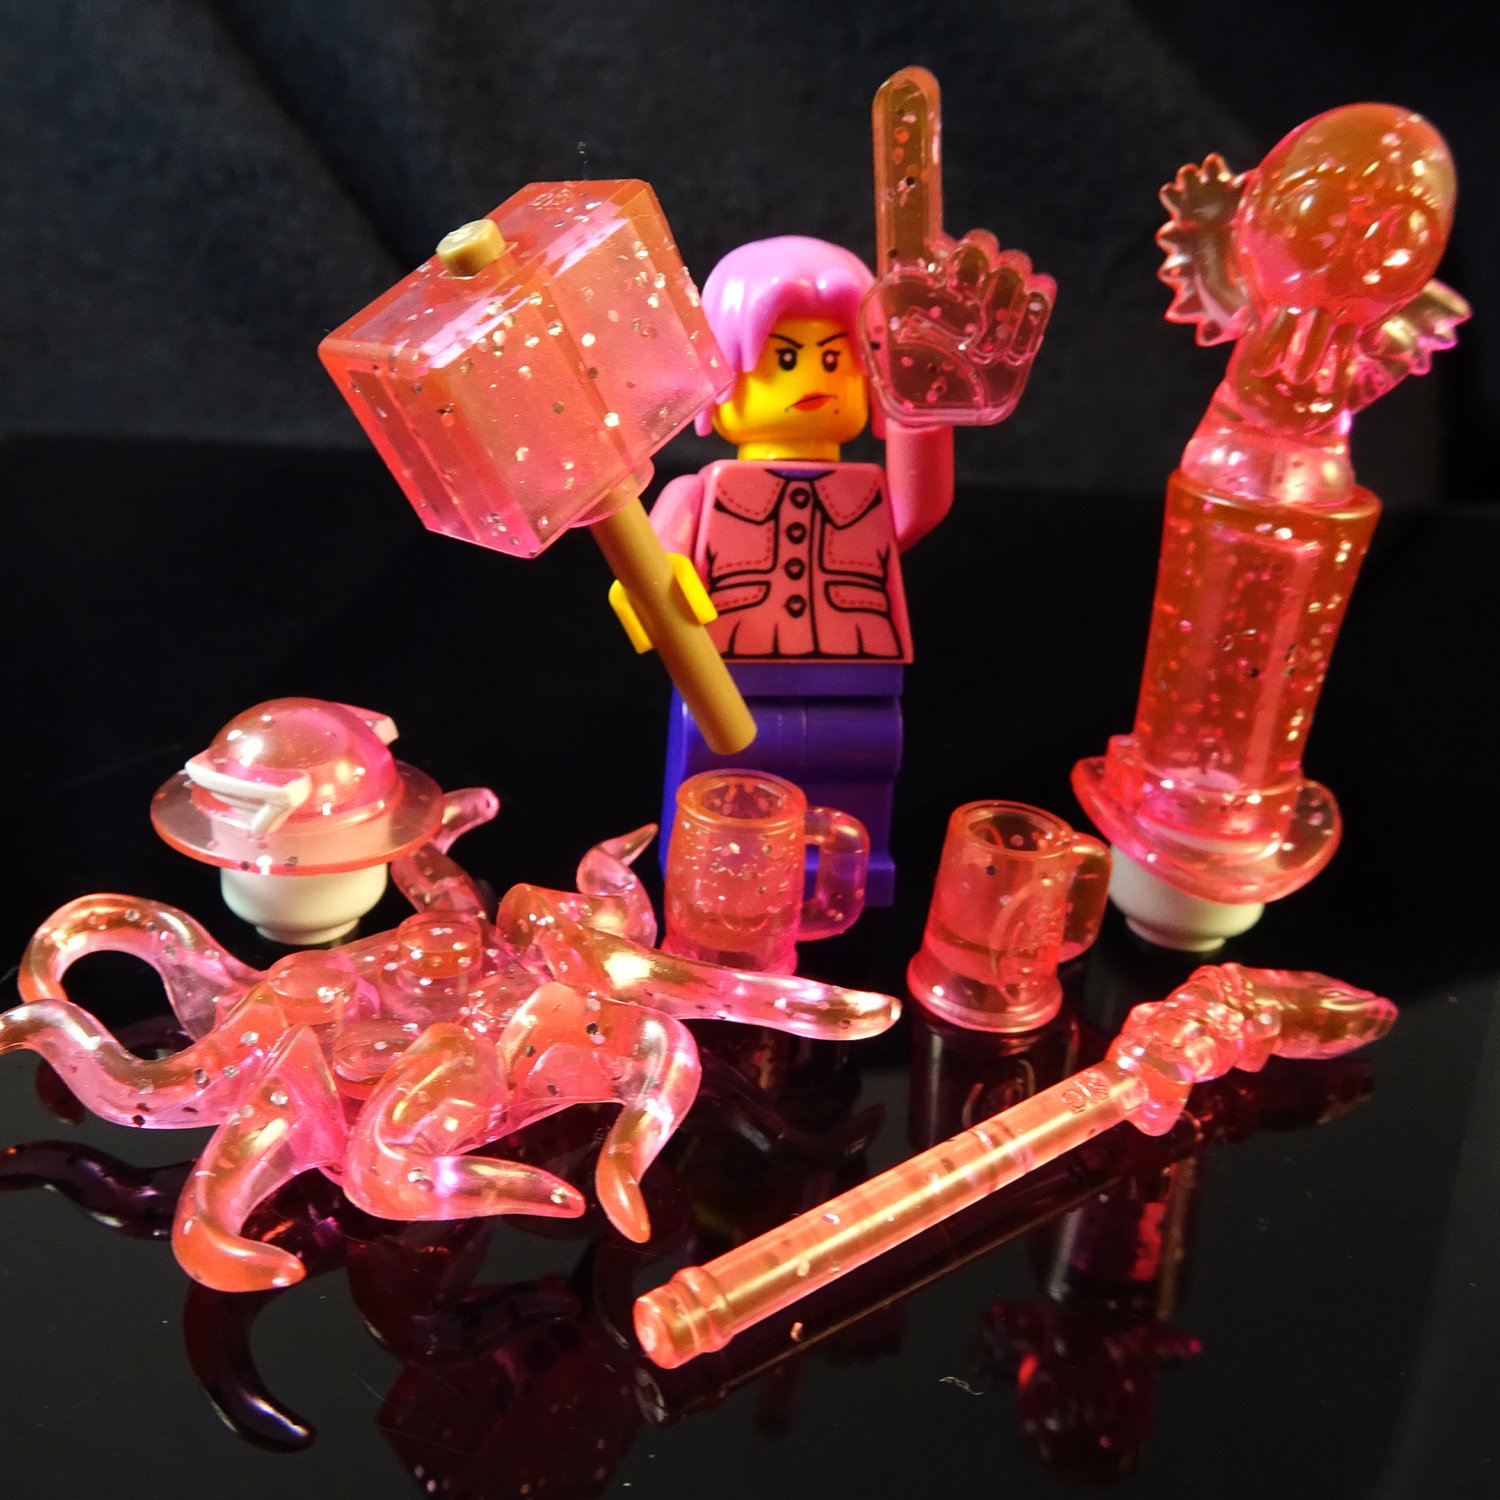 Munchkin Bricks 2 in Sparkly Pink! Limited Quantities